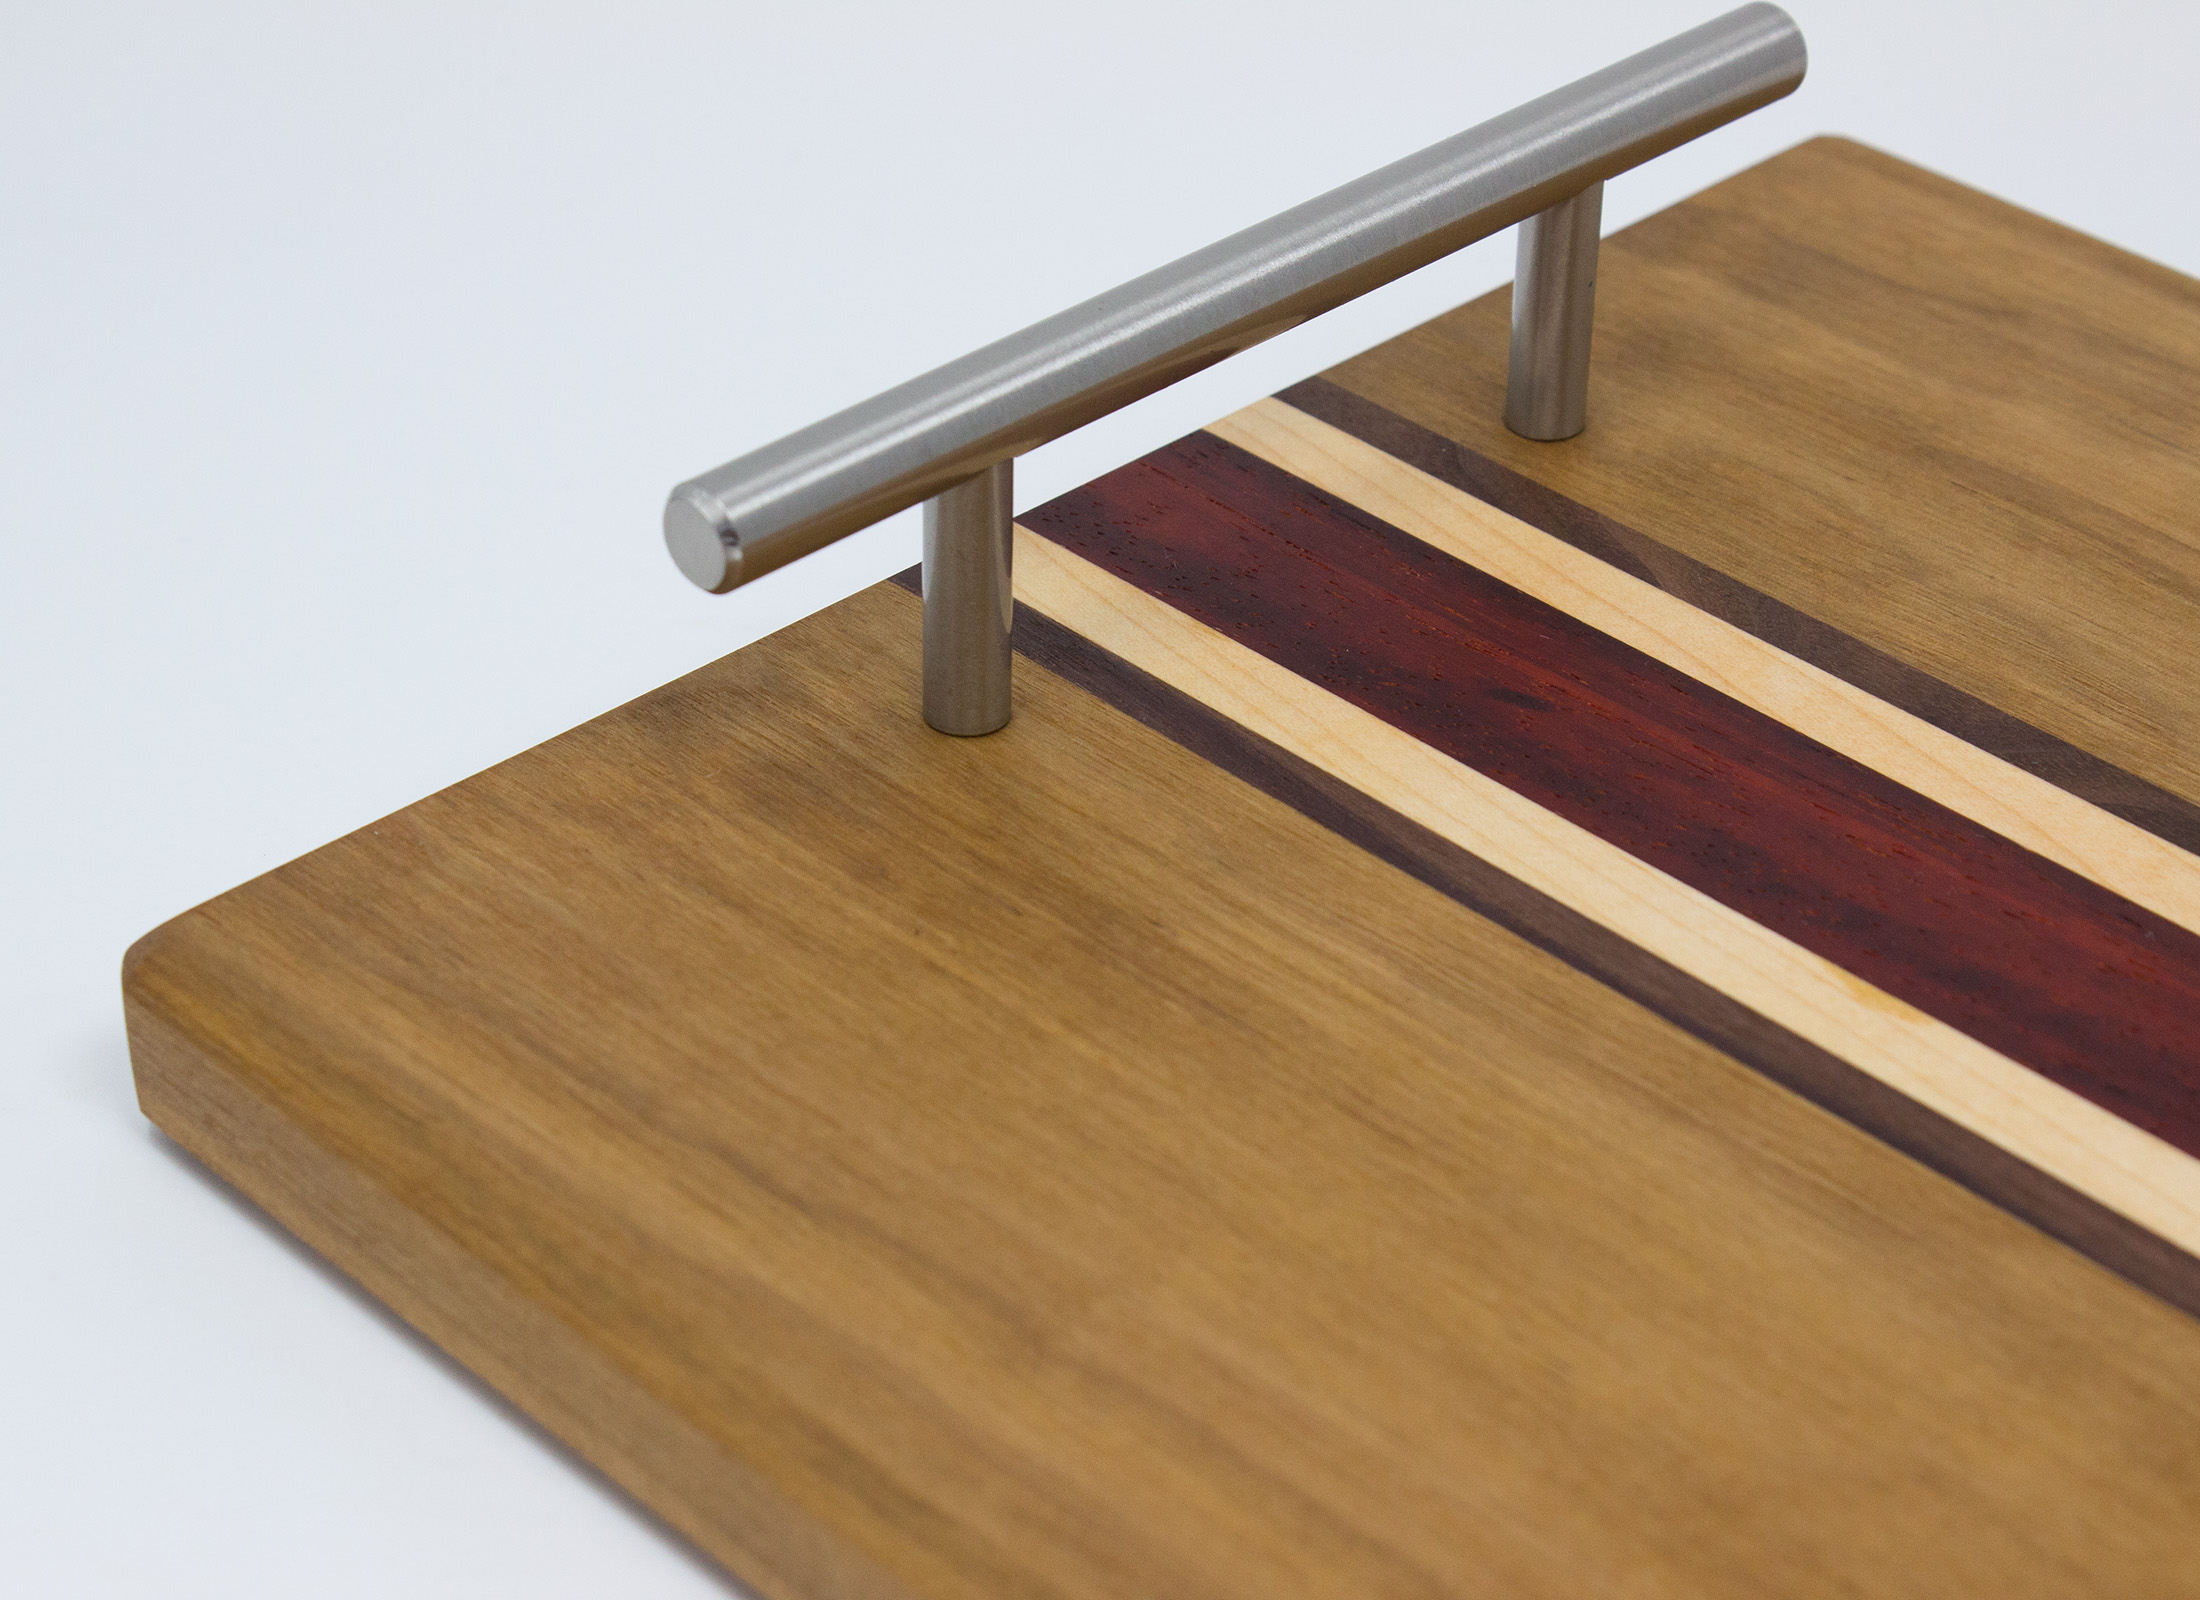 Handcrafted with Walnut Hardwood Serving Tray Offset Stripes and Padauk Maple